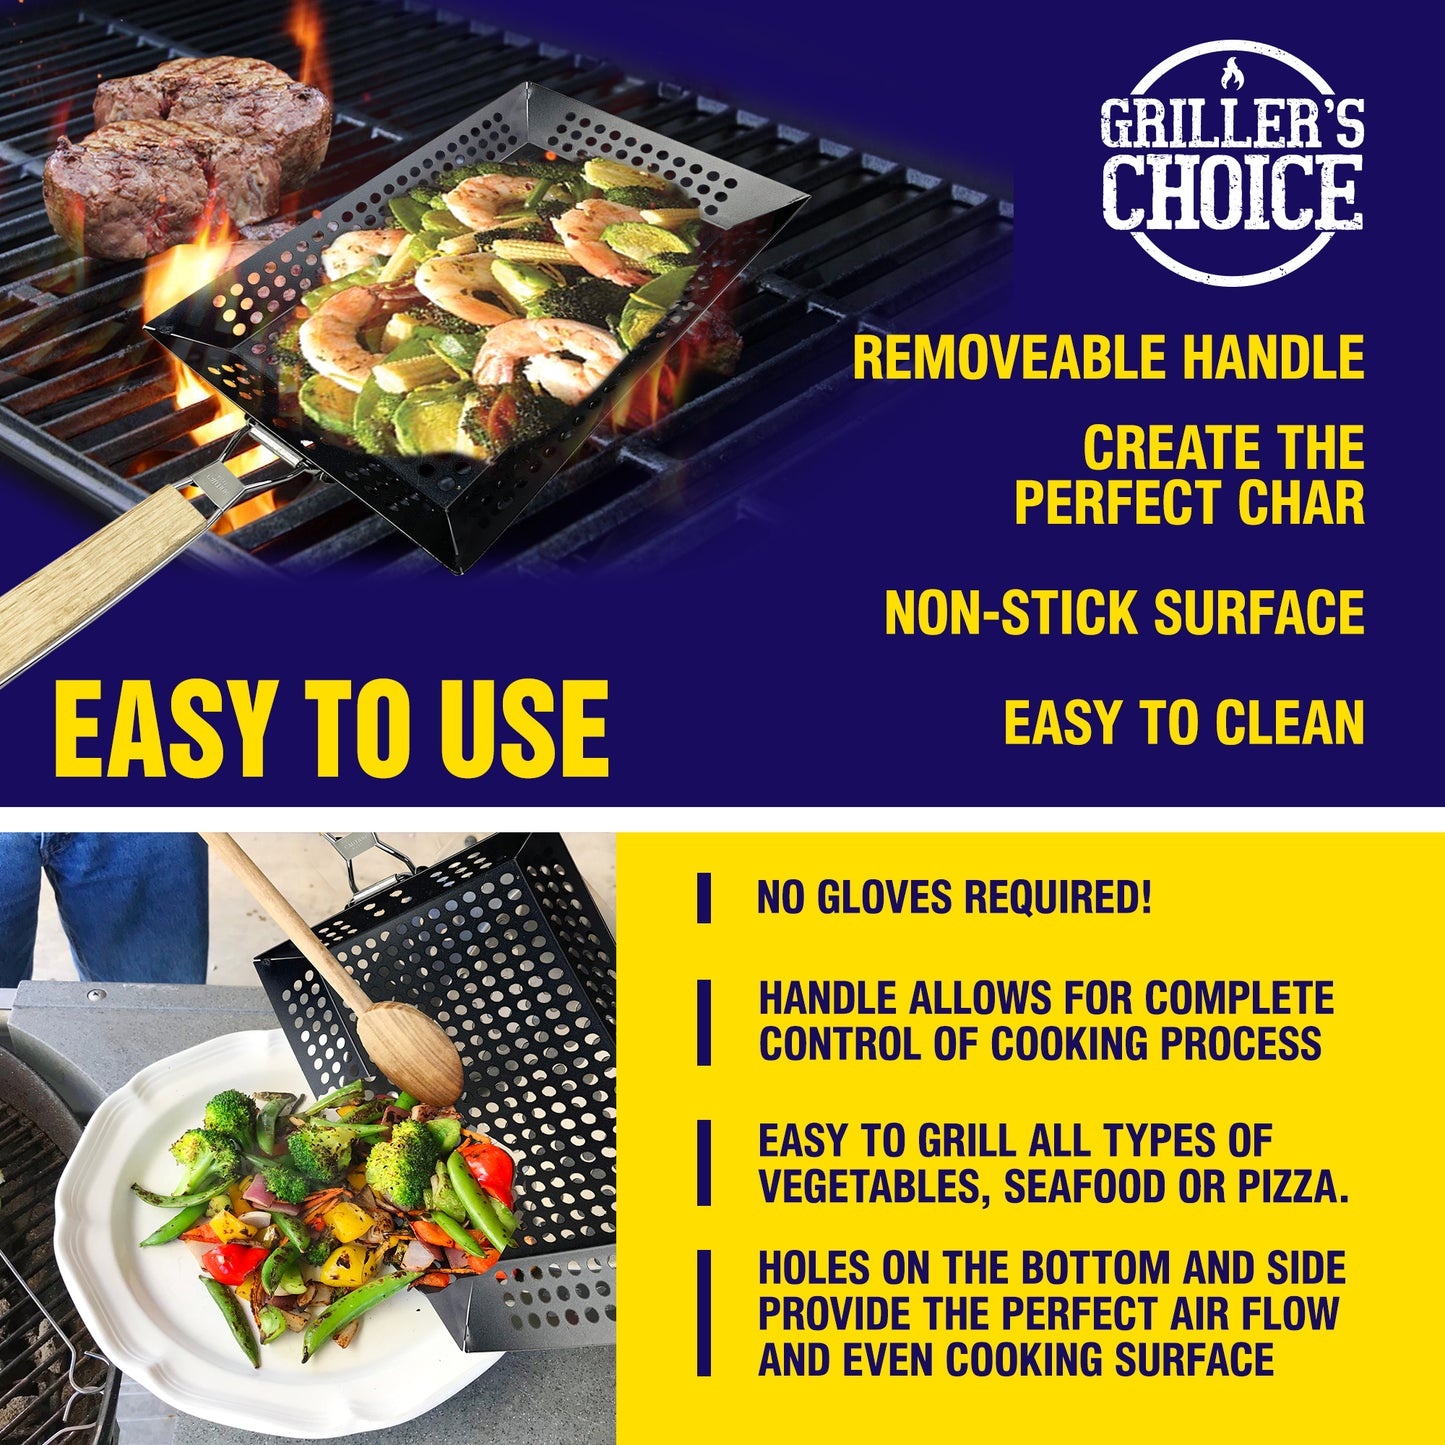 Griller's Choice Rectangular Grill Basket With Removeable Handle - Large Non-Stick Commercial Basket With Handle For Outdoor Grilling. Designed By Chef, BBQ Judge. BBQ Grill Accessory Grill Pan.